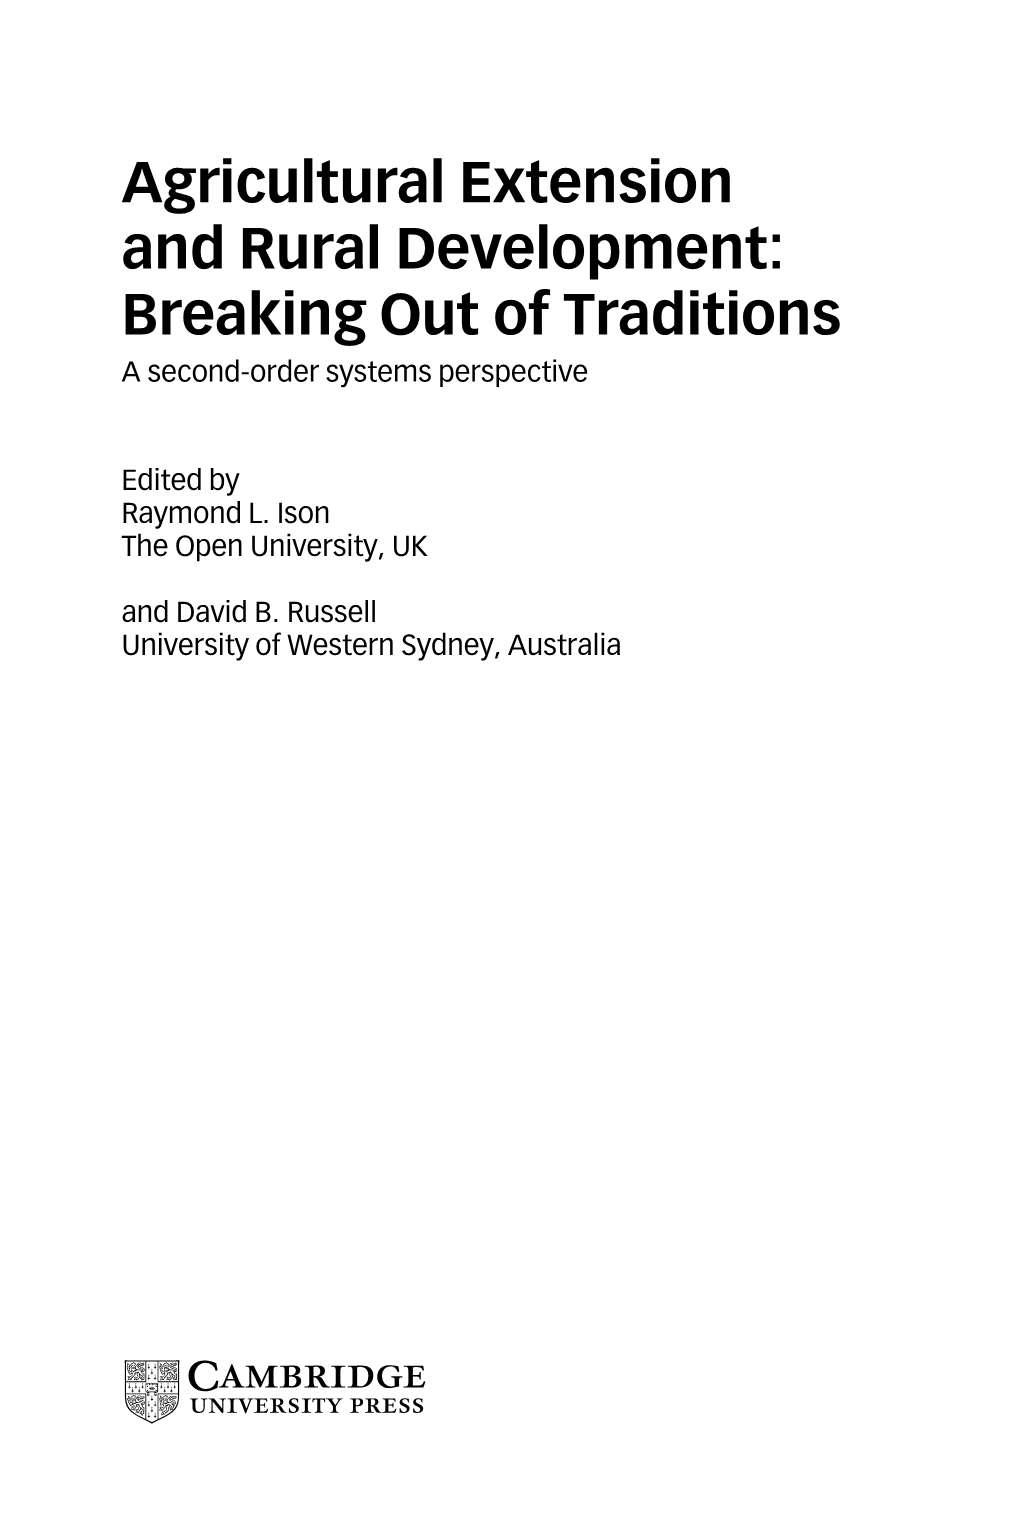 Agricultural Extension and Rural Development: Breaking out of Traditions a Second-Order Systems Perspective